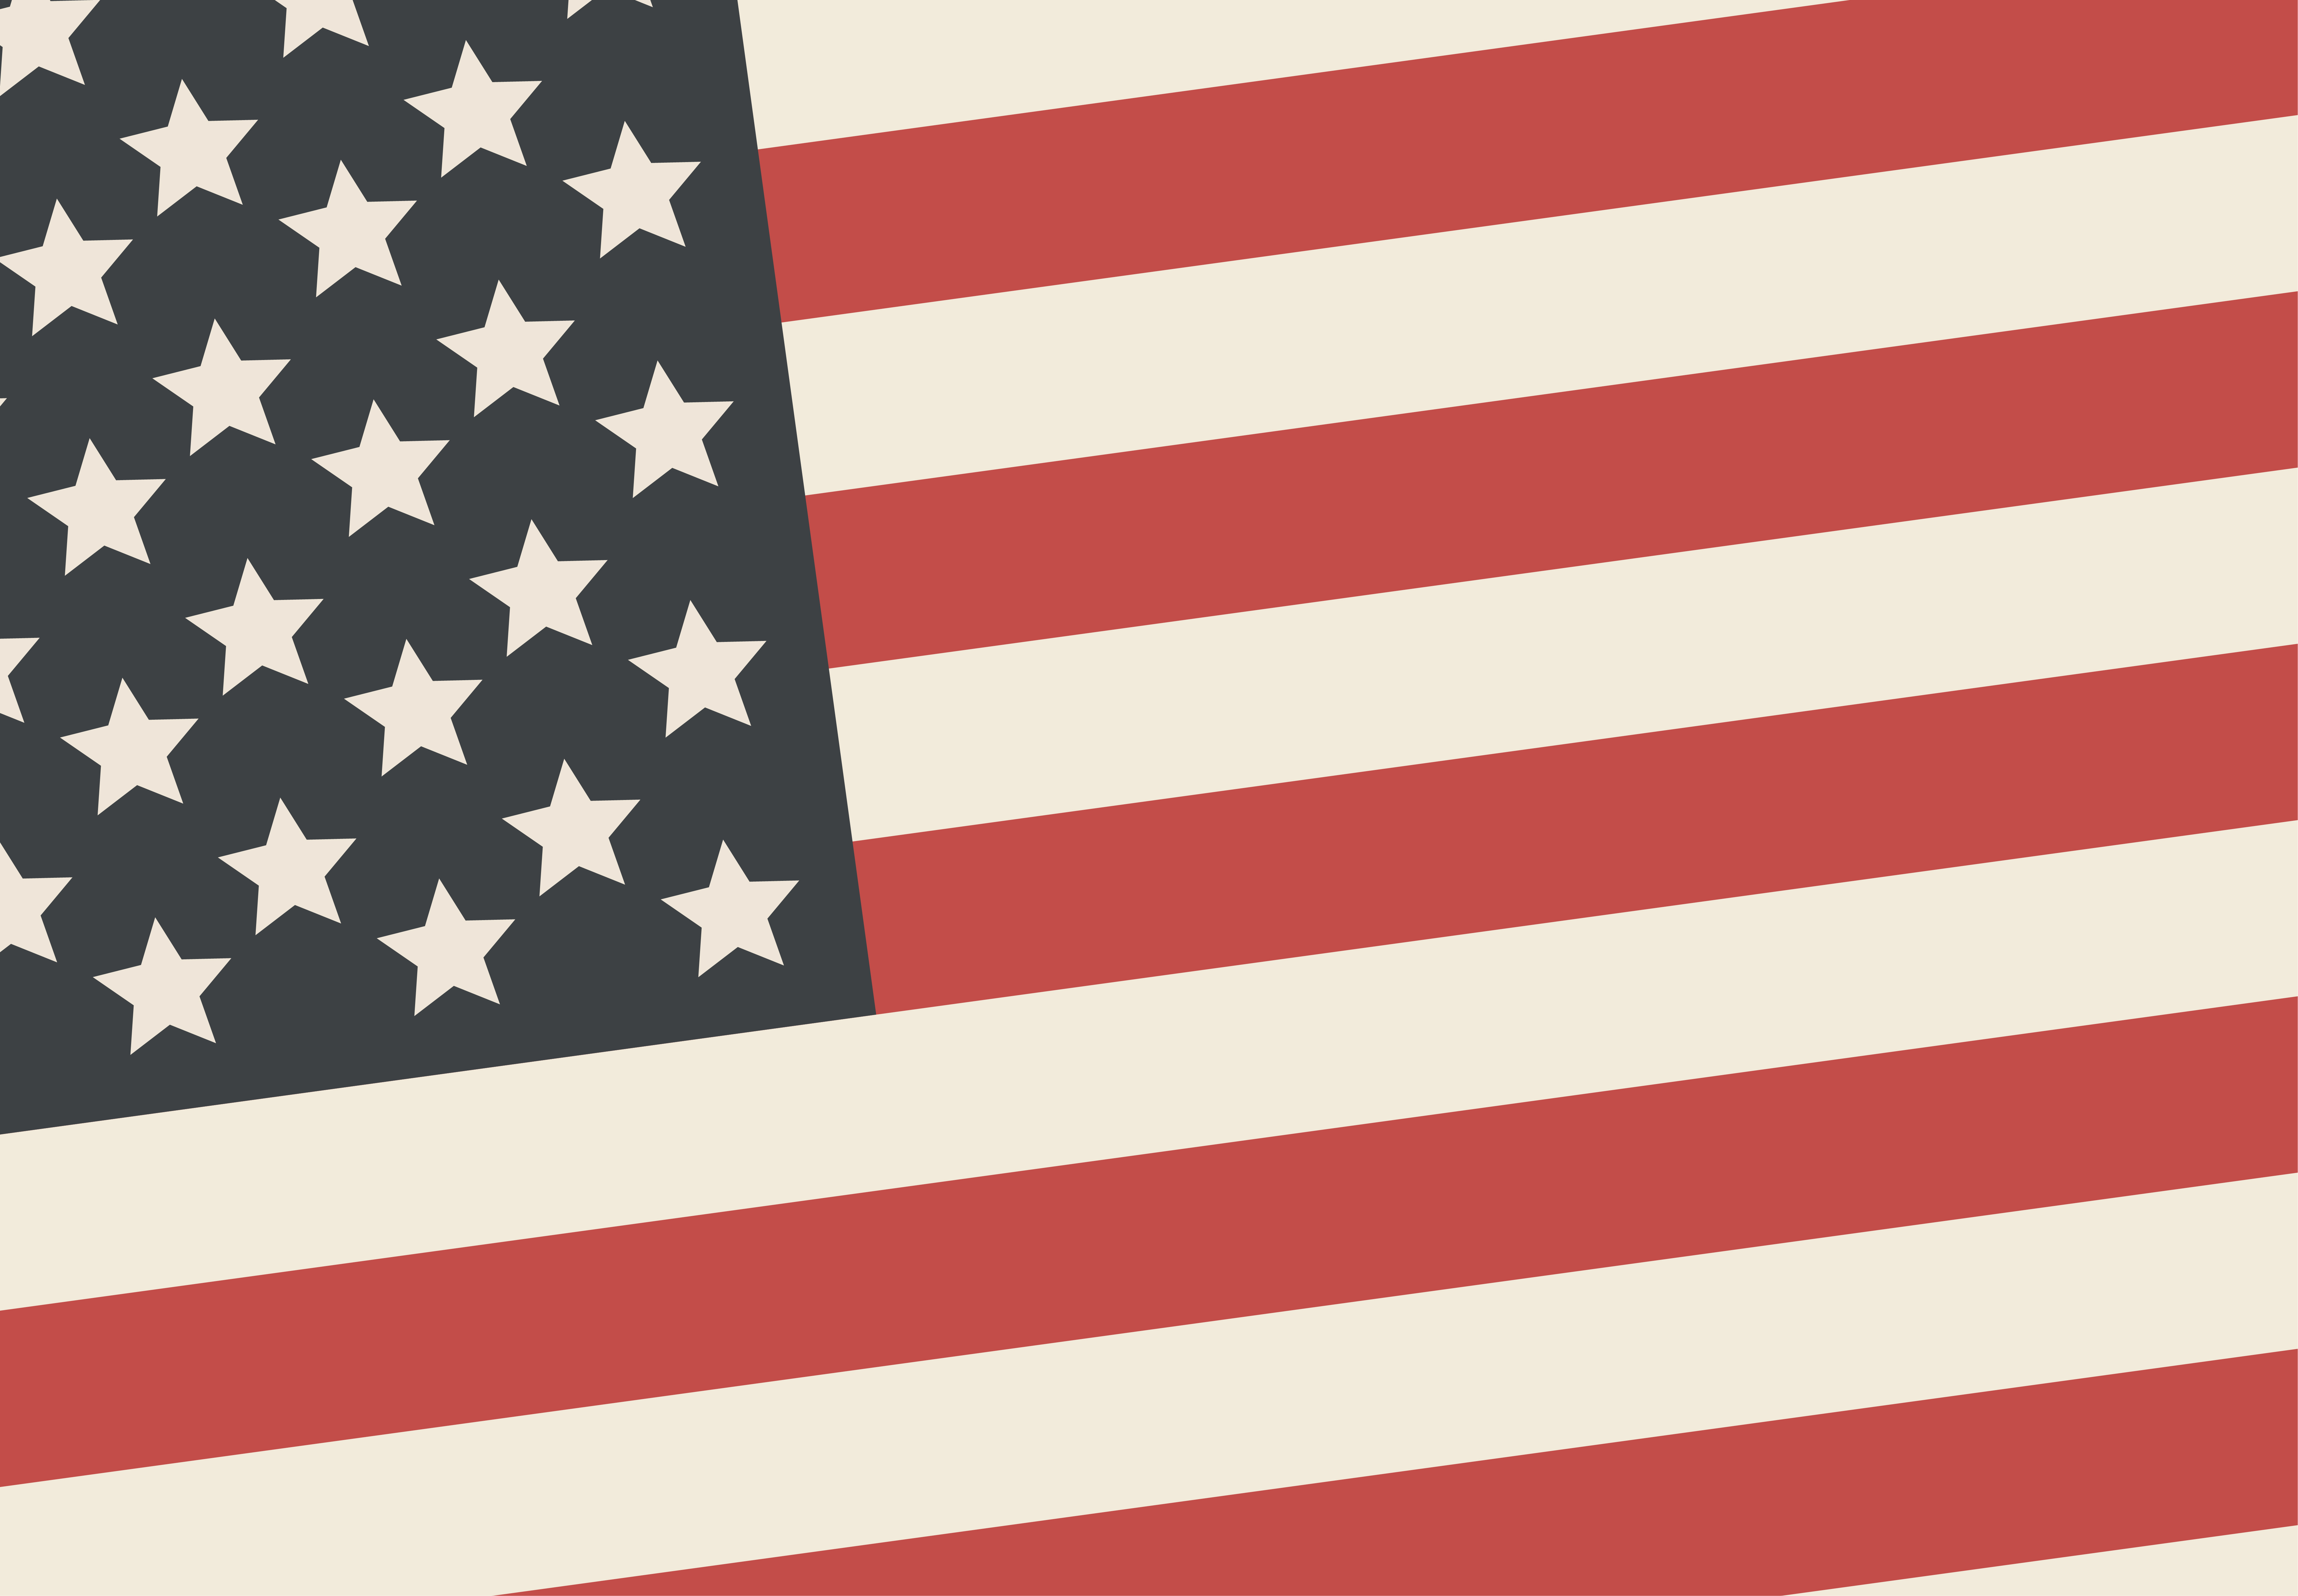 USA background. Flag of United States of America. American vector illustration.